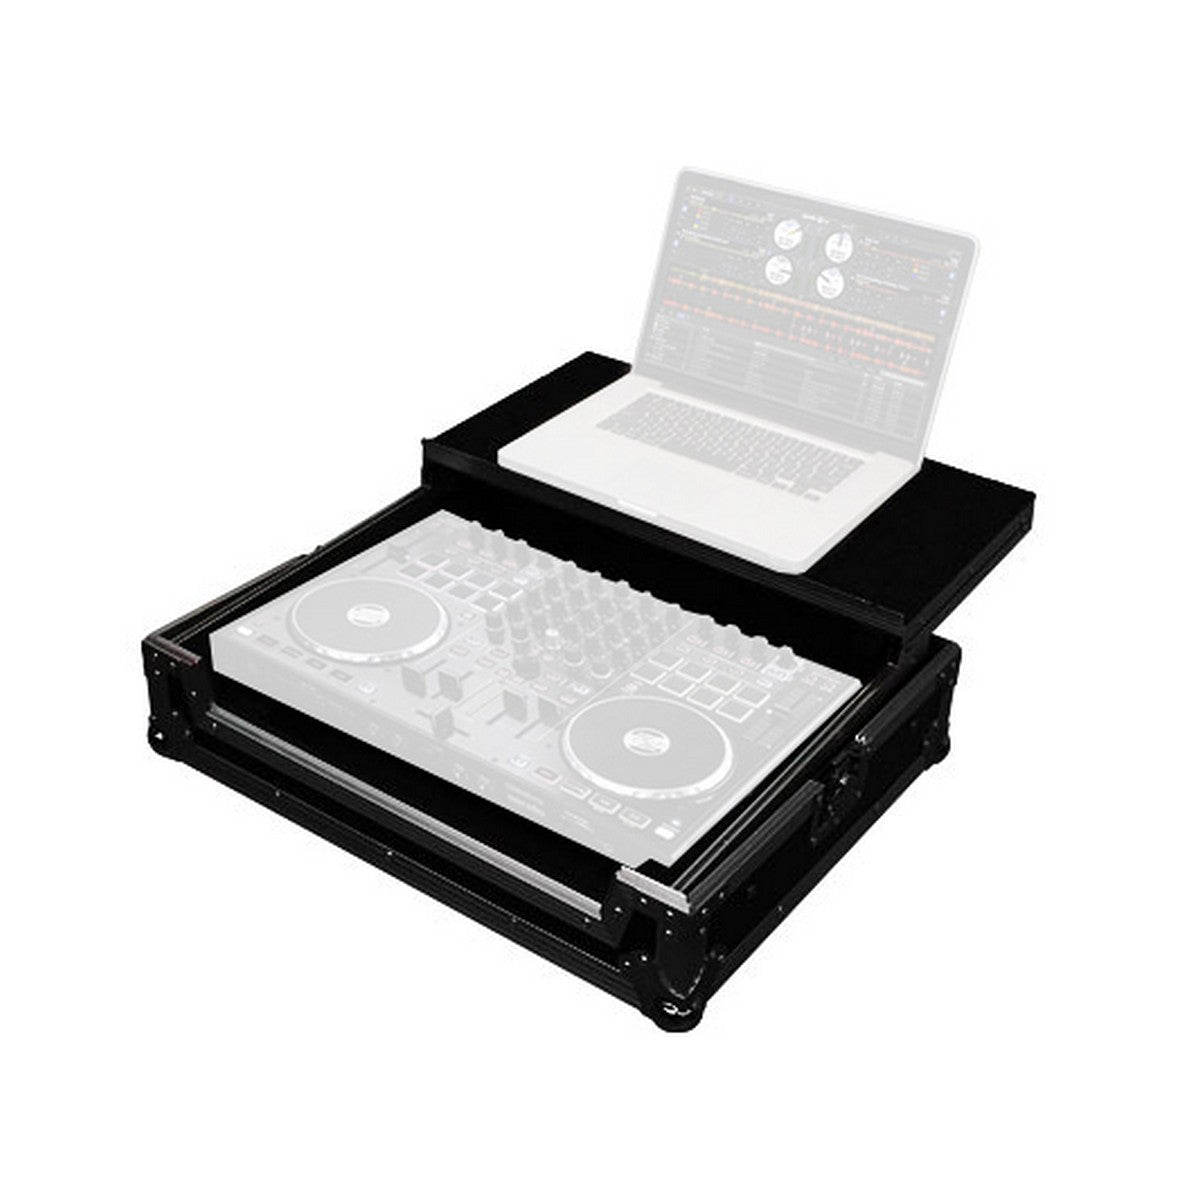 Odyssey Cases FZGSTERMIX8BL Black Label Reloop Terminal Mix 8 Serato DJ Controller Glide Style Case (Used)